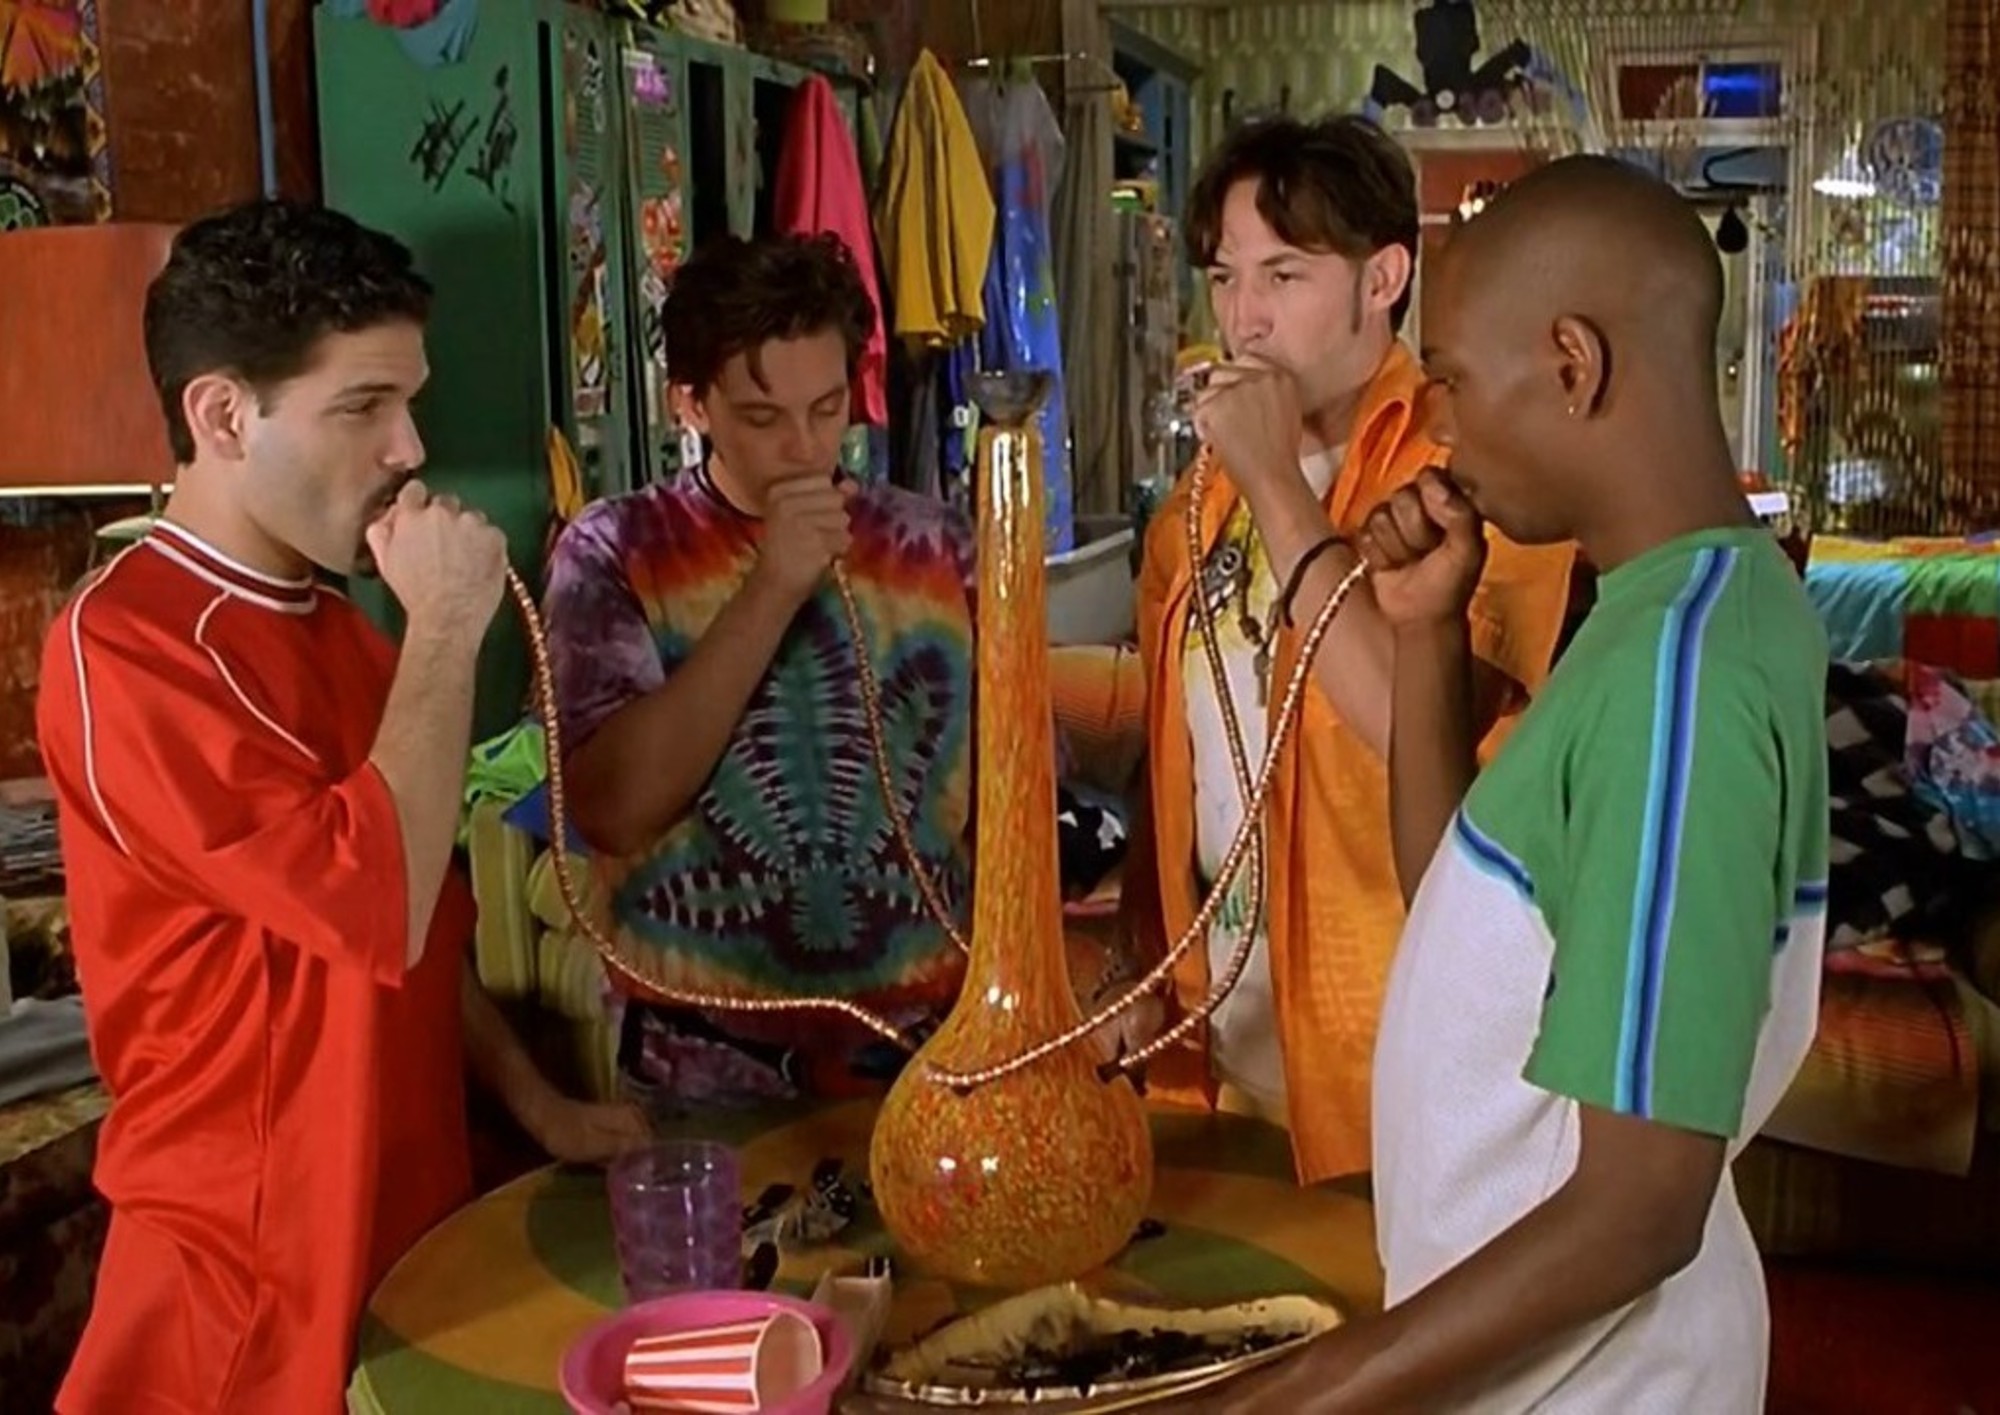 Image from the motion picture Half Baked